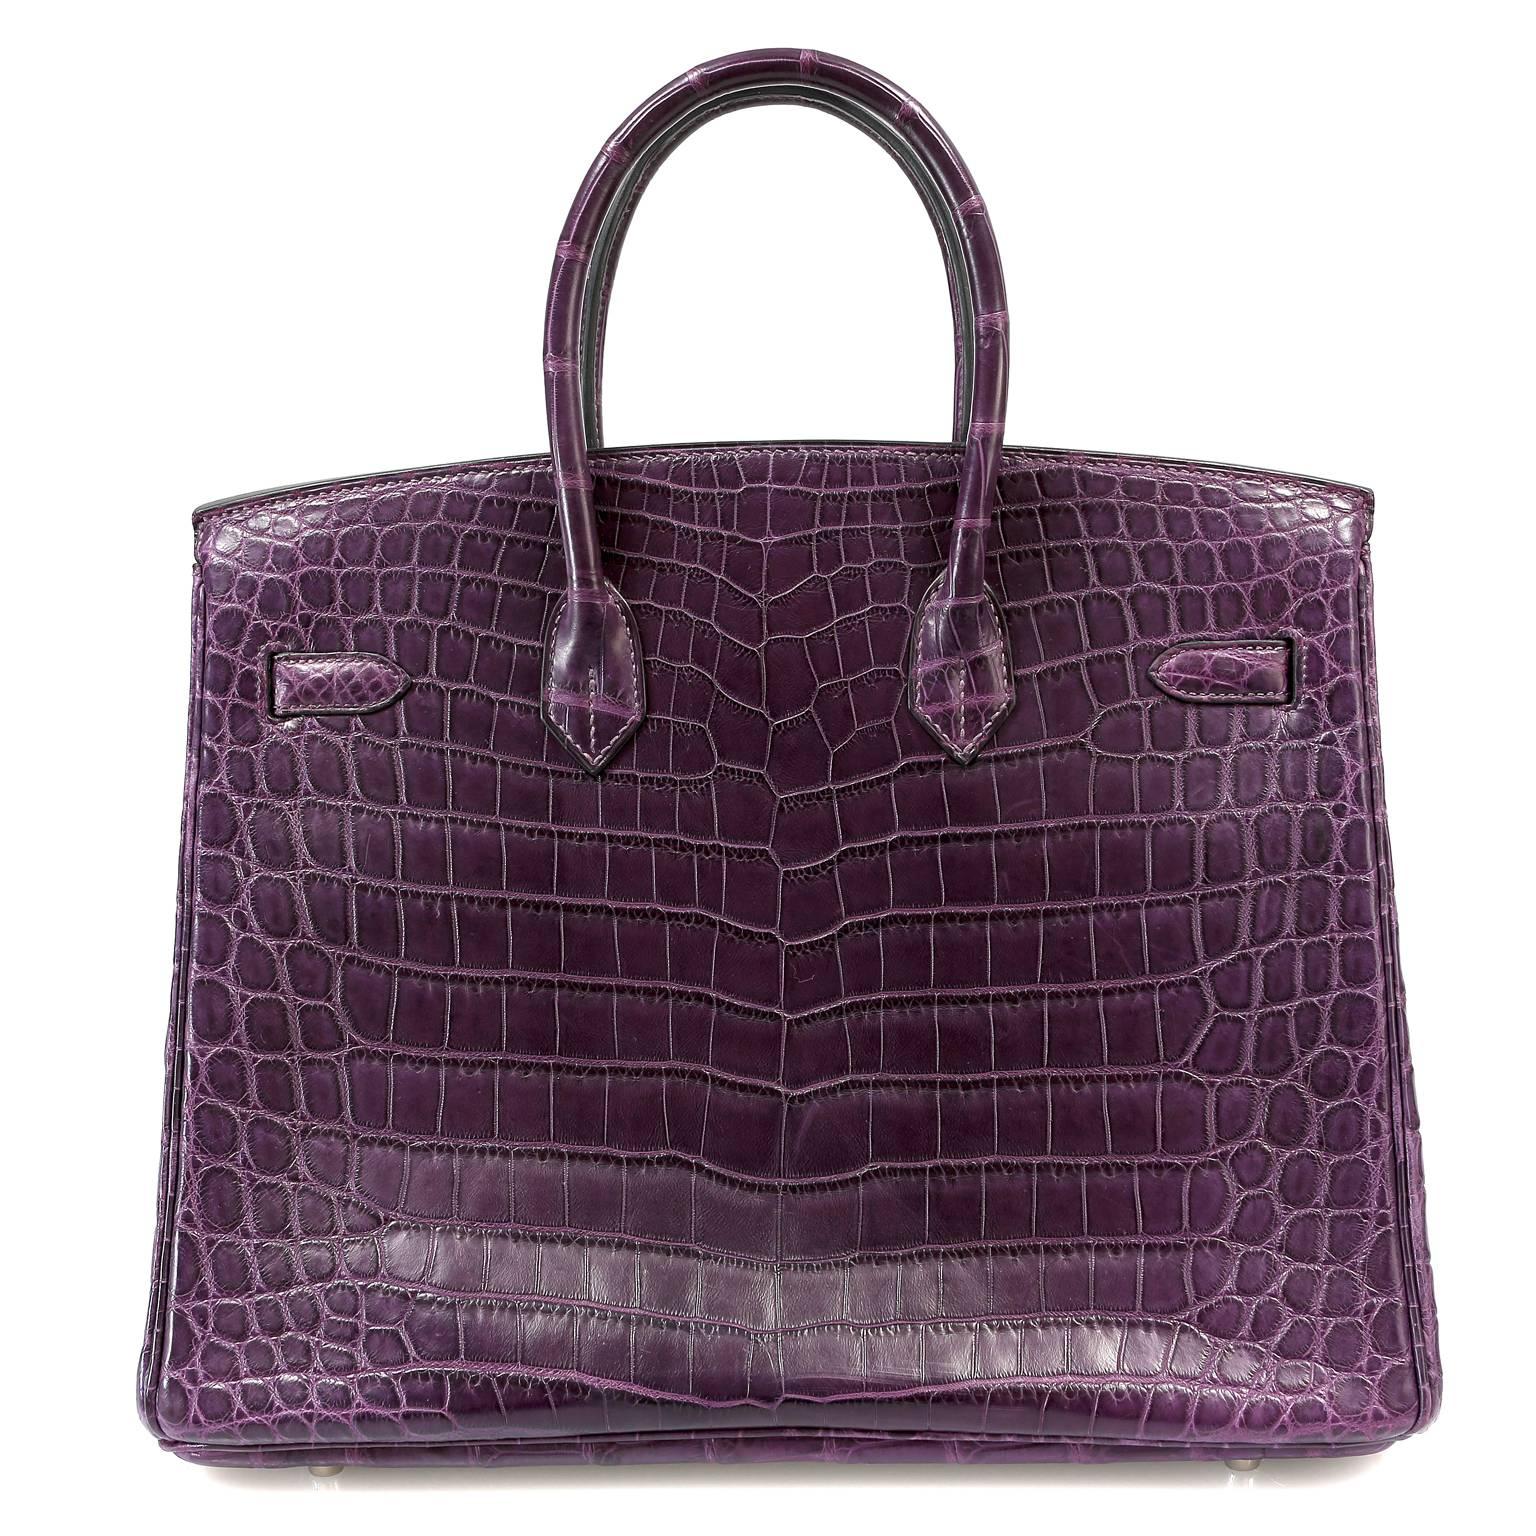 Hermès Amethyst Matte Niloticus Crocodile 35cm Birkin- PRISTINE; Never Carried
 Incredibly rare and specially ordered, this exotic Birkin is truly stunning in jewel toned purple croc with Palladium hardware. 
 
Hermès bags are considered the